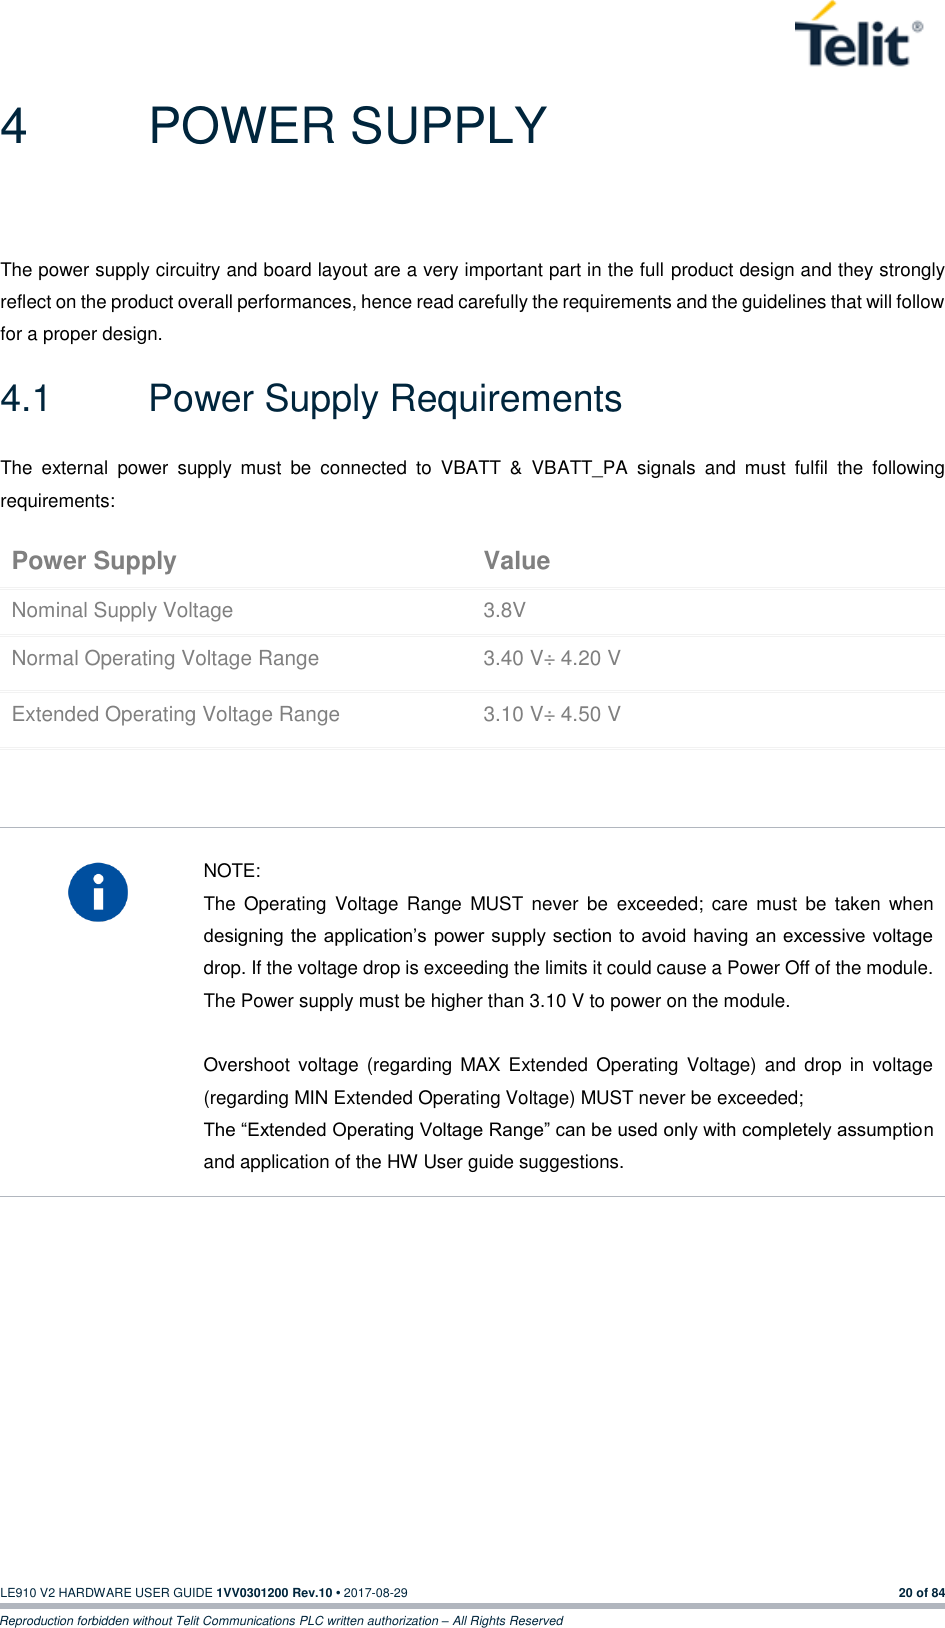   LE910 V2 HARDWARE USER GUIDE 1VV0301200 Rev.10 • 2017-08-29  20 of 84 Reproduction forbidden without Telit Communications PLC written authorization – All Rights Reserved 4  POWER SUPPLY The power supply circuitry and board layout are a very important part in the full product design and they strongly reflect on the product overall performances, hence read carefully the requirements and the guidelines that will follow for a proper design. 4.1  Power Supply Requirements The  external  power  supply  must  be  connected  to  VBATT  &amp;  VBATT_PA  signals  and  must  fulfil  the  following requirements: Power Supply Value Nominal Supply Voltage 3.8V Normal Operating Voltage Range 3.40 V÷ 4.20 V Extended Operating Voltage Range 3.10 V÷ 4.50 V     NOTE: The  Operating  Voltage  Range  MUST  never  be  exceeded;  care  must  be  taken  when designing the application’s power supply section to avoid having an excessive voltage drop. If the voltage drop is exceeding the limits it could cause a Power Off of the module. The Power supply must be higher than 3.10 V to power on the module.  Overshoot  voltage (regarding MAX  Extended  Operating  Voltage)  and  drop  in voltage (regarding MIN Extended Operating Voltage) MUST never be exceeded;  The “Extended Operating Voltage Range” can be used only with completely assumption and application of the HW User guide suggestions.    